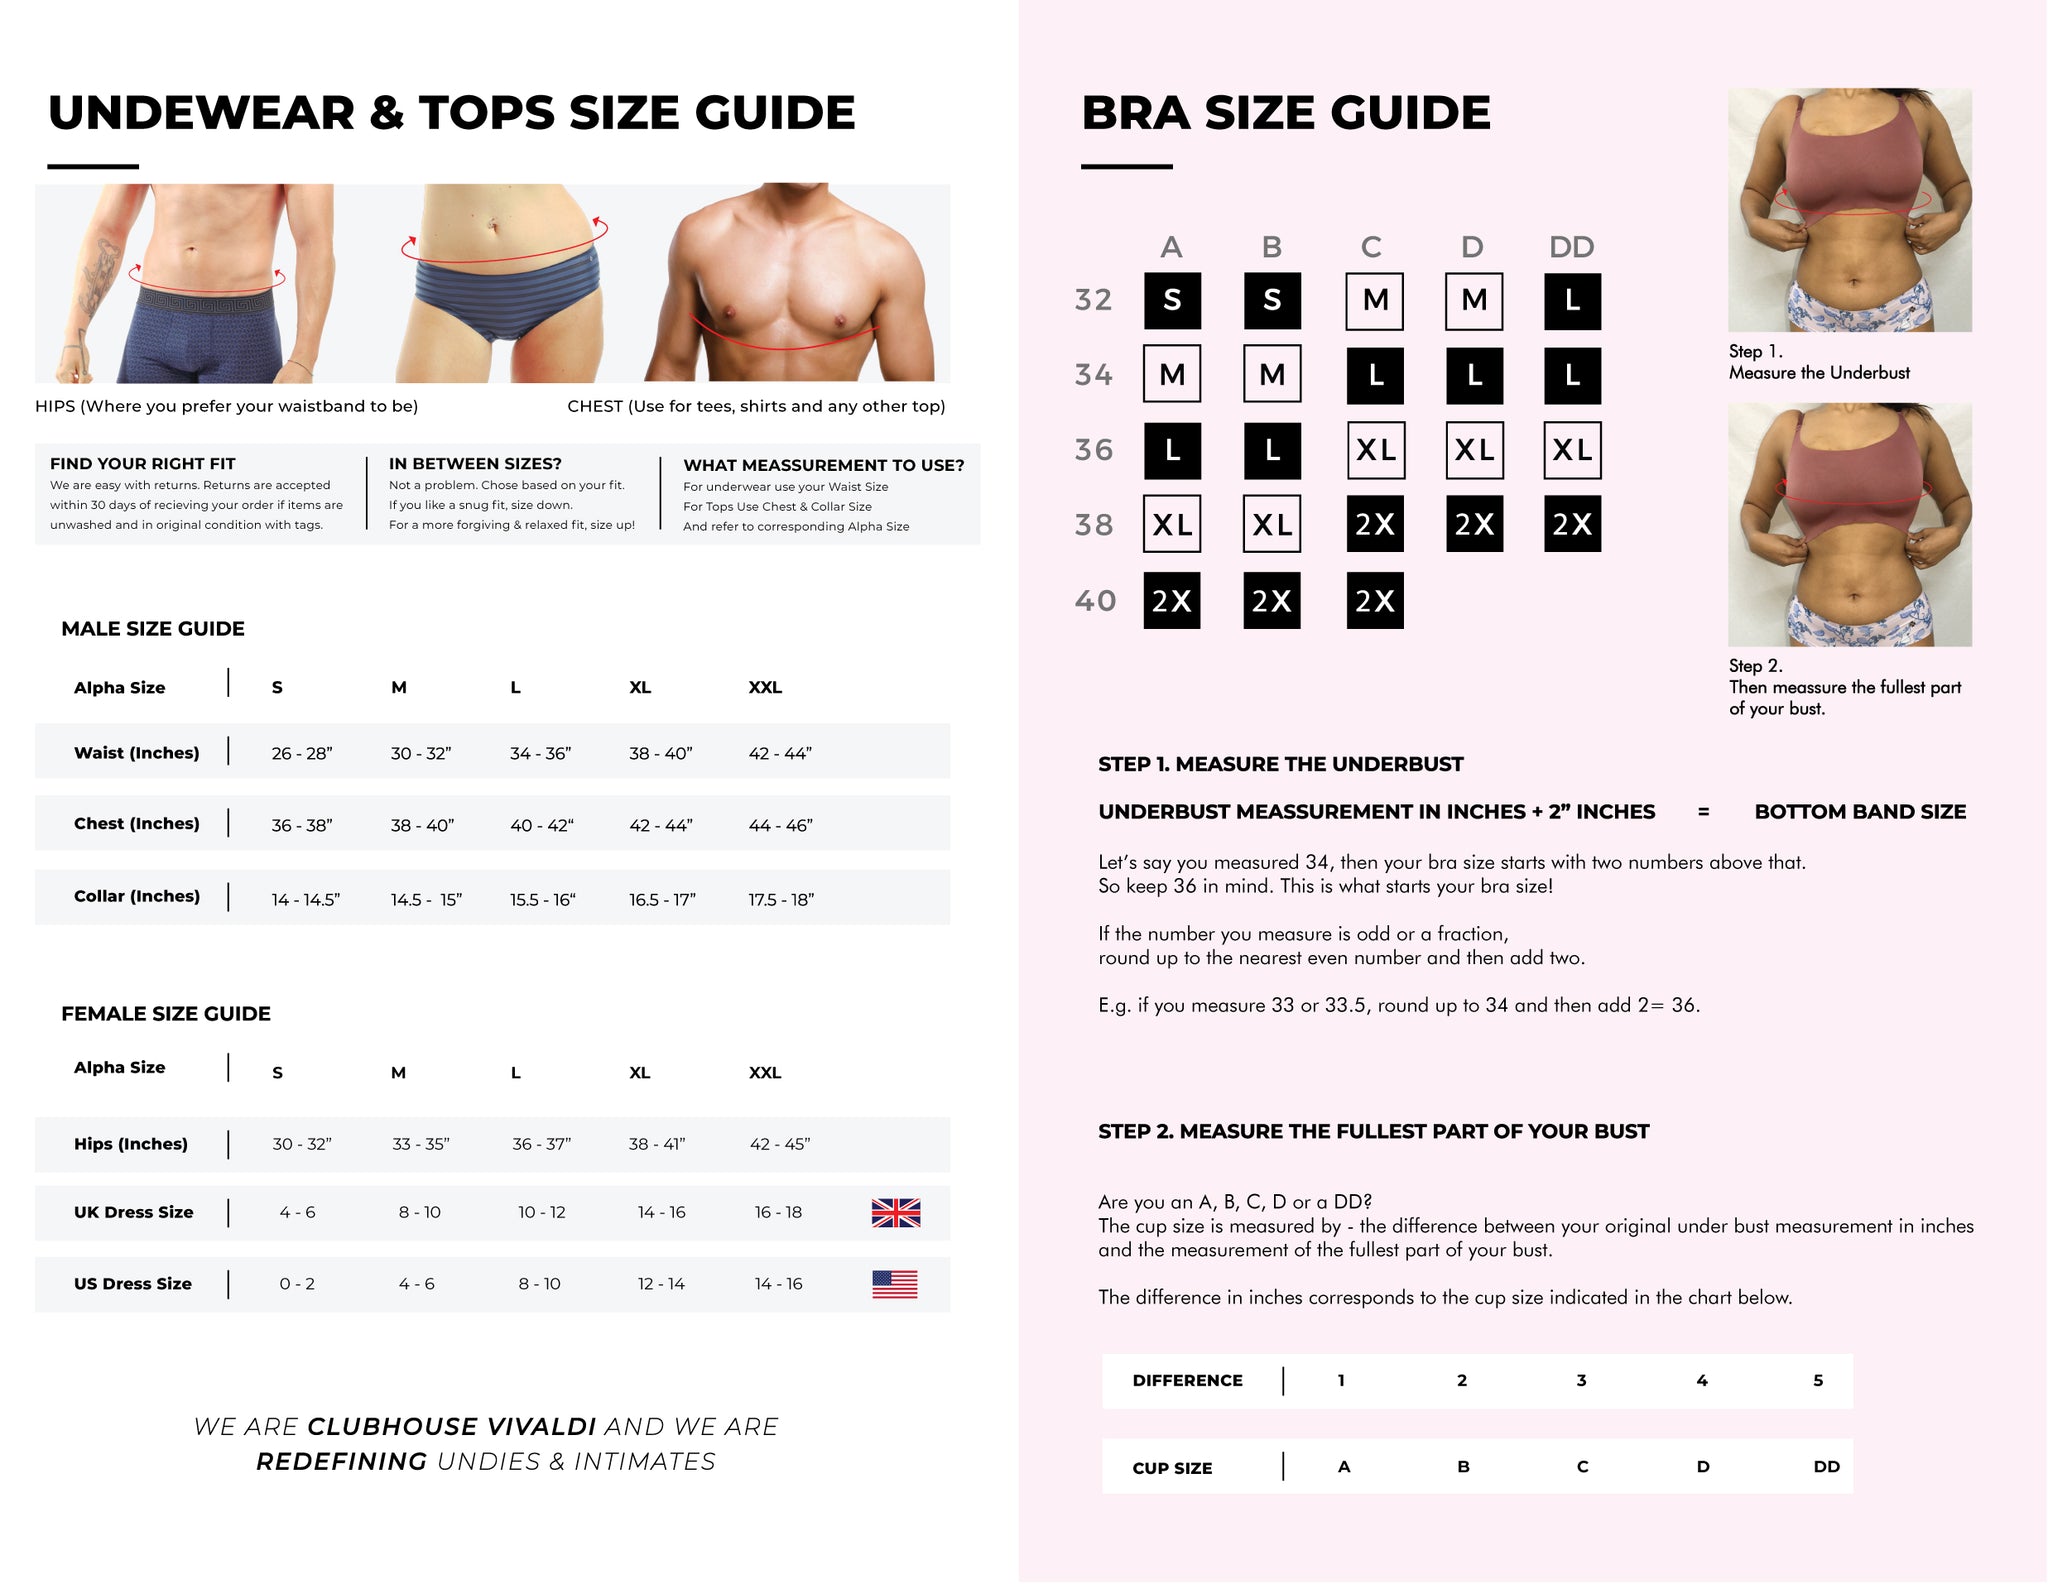 Measure your underwear and bra size! 